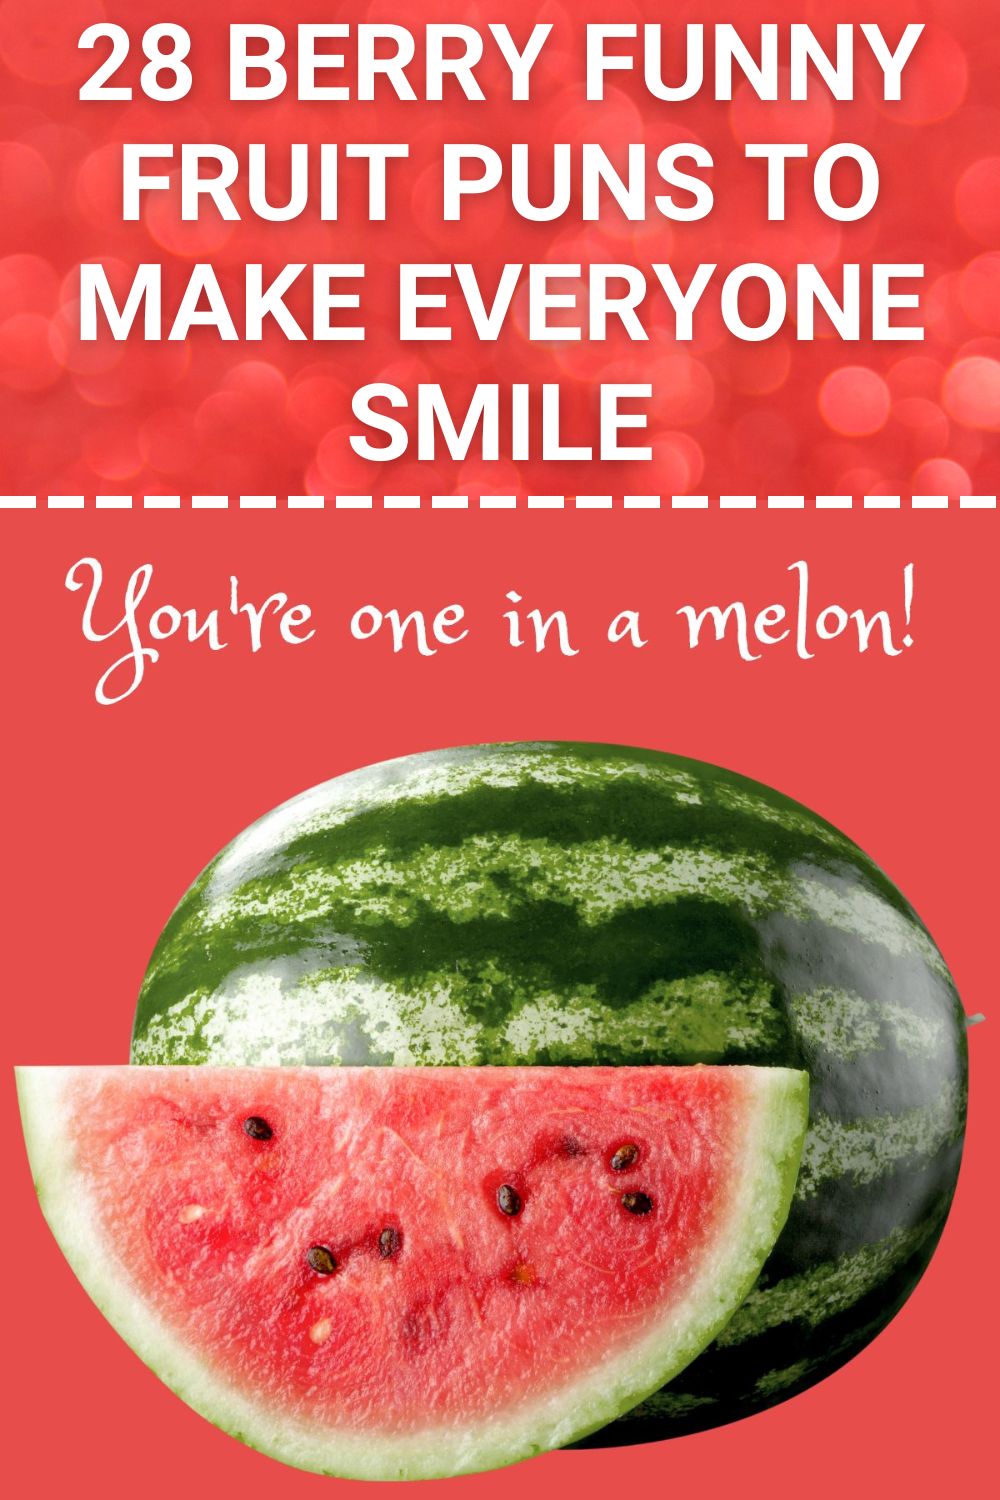 28 berry funny fruit puns to make everyone smile